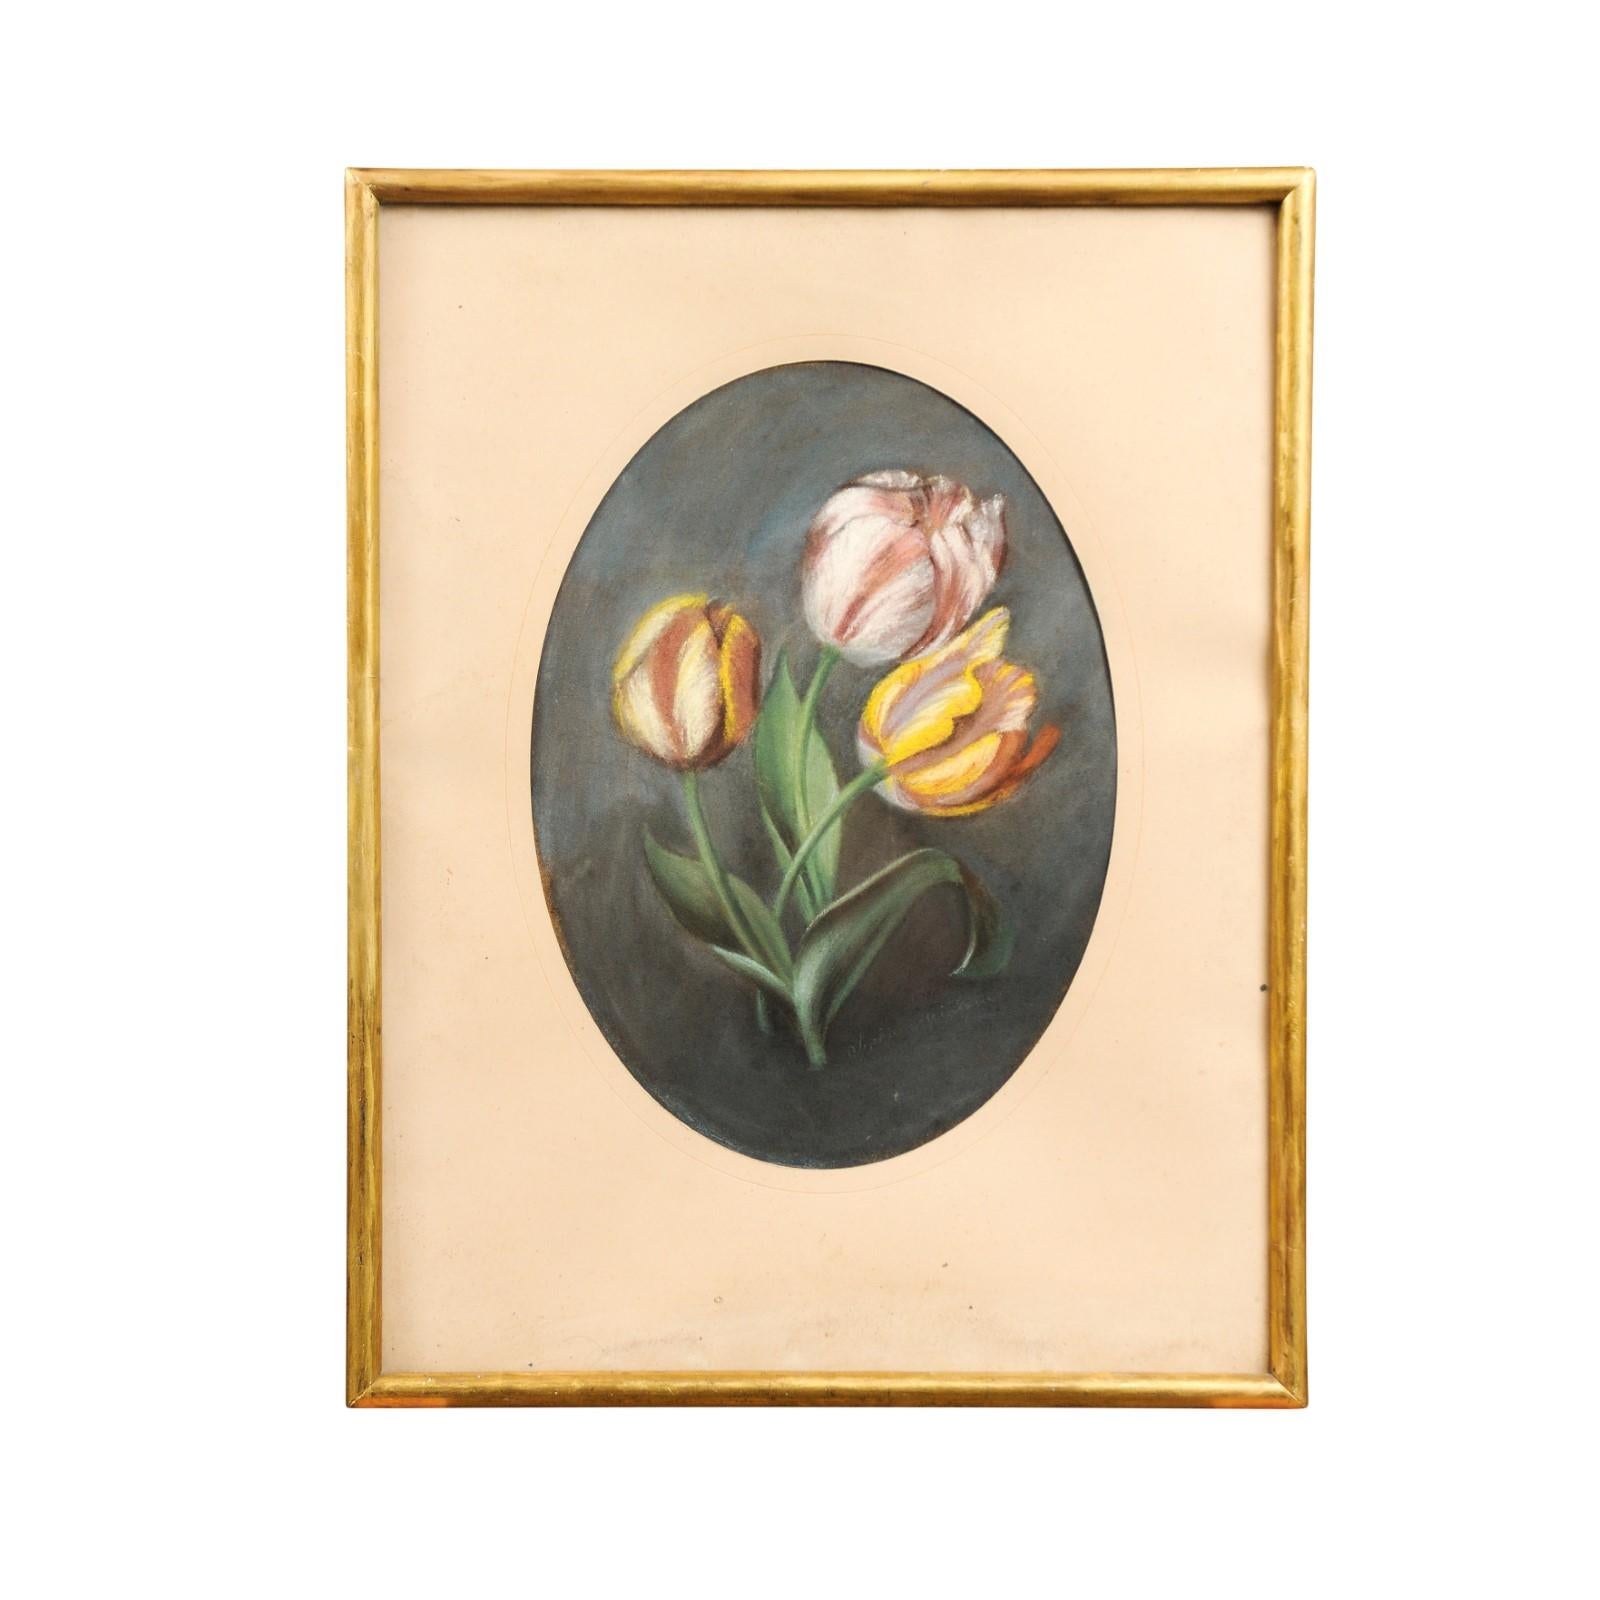 A French pastel still-life painting from the 19th century depicting a bouquet of tulips on grey background, in gilded frame. A lovely French pastel still-life painting from the 19th century, depicting a vibrant bouquet of tulips against a dark grey